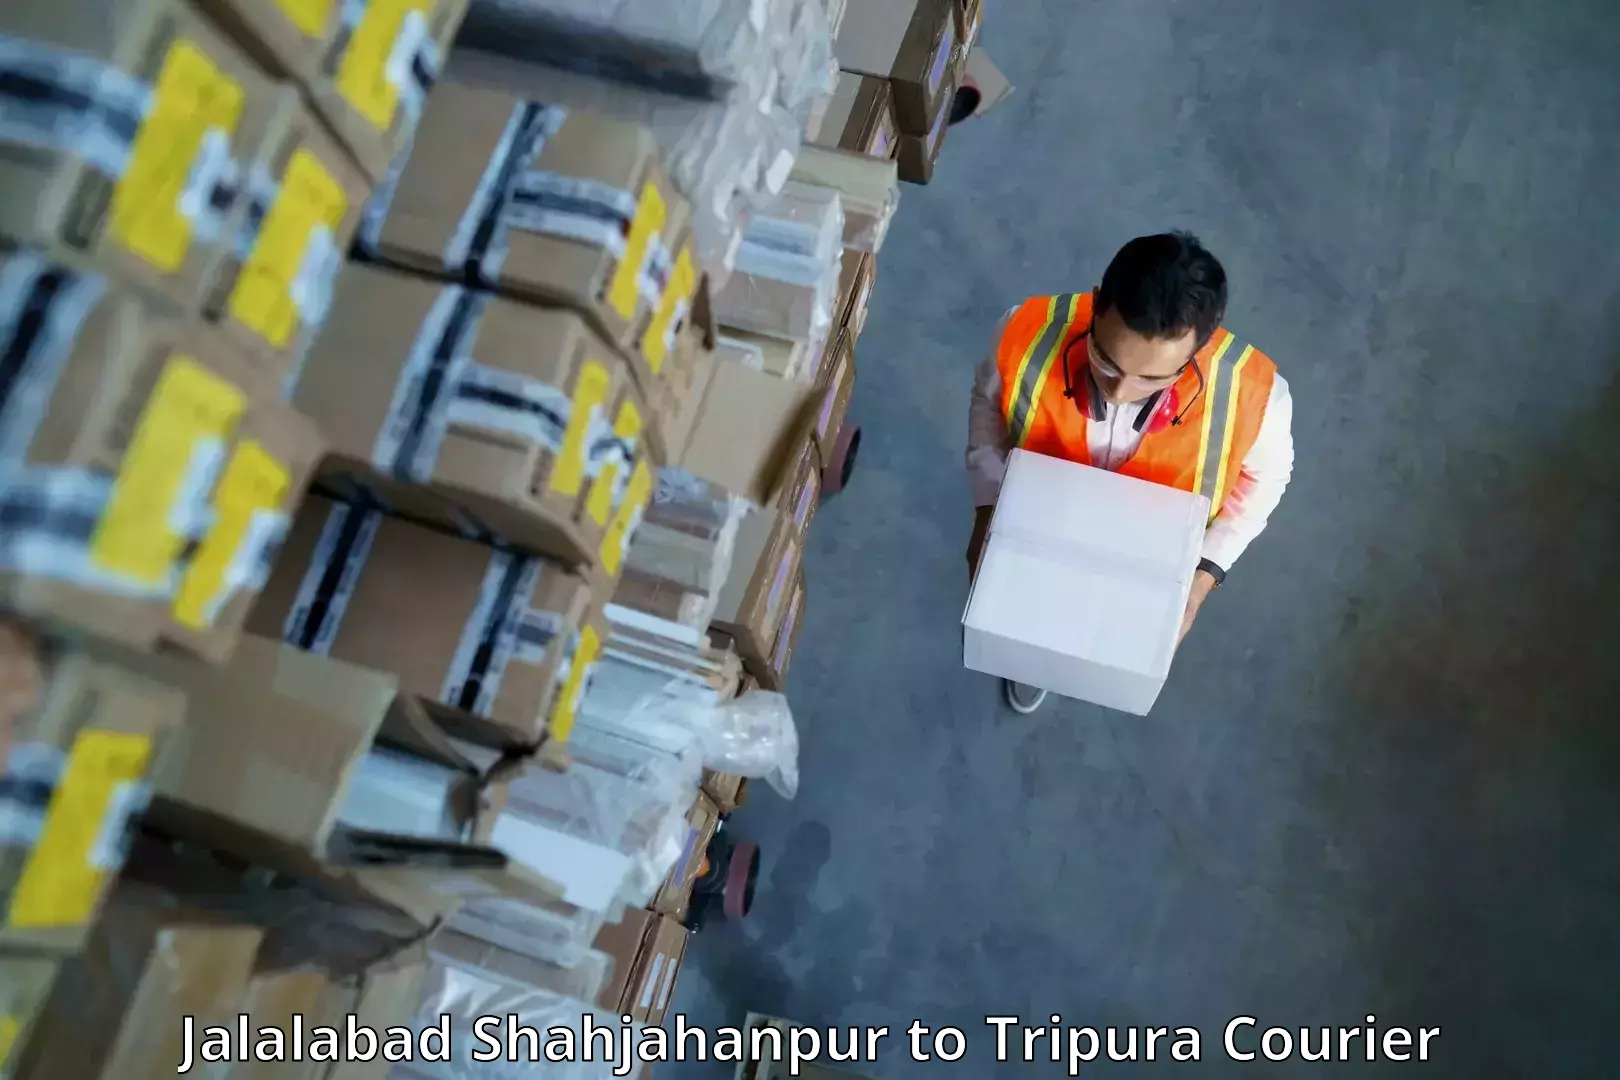 Supply chain efficiency in Jalalabad Shahjahanpur to Amarpur